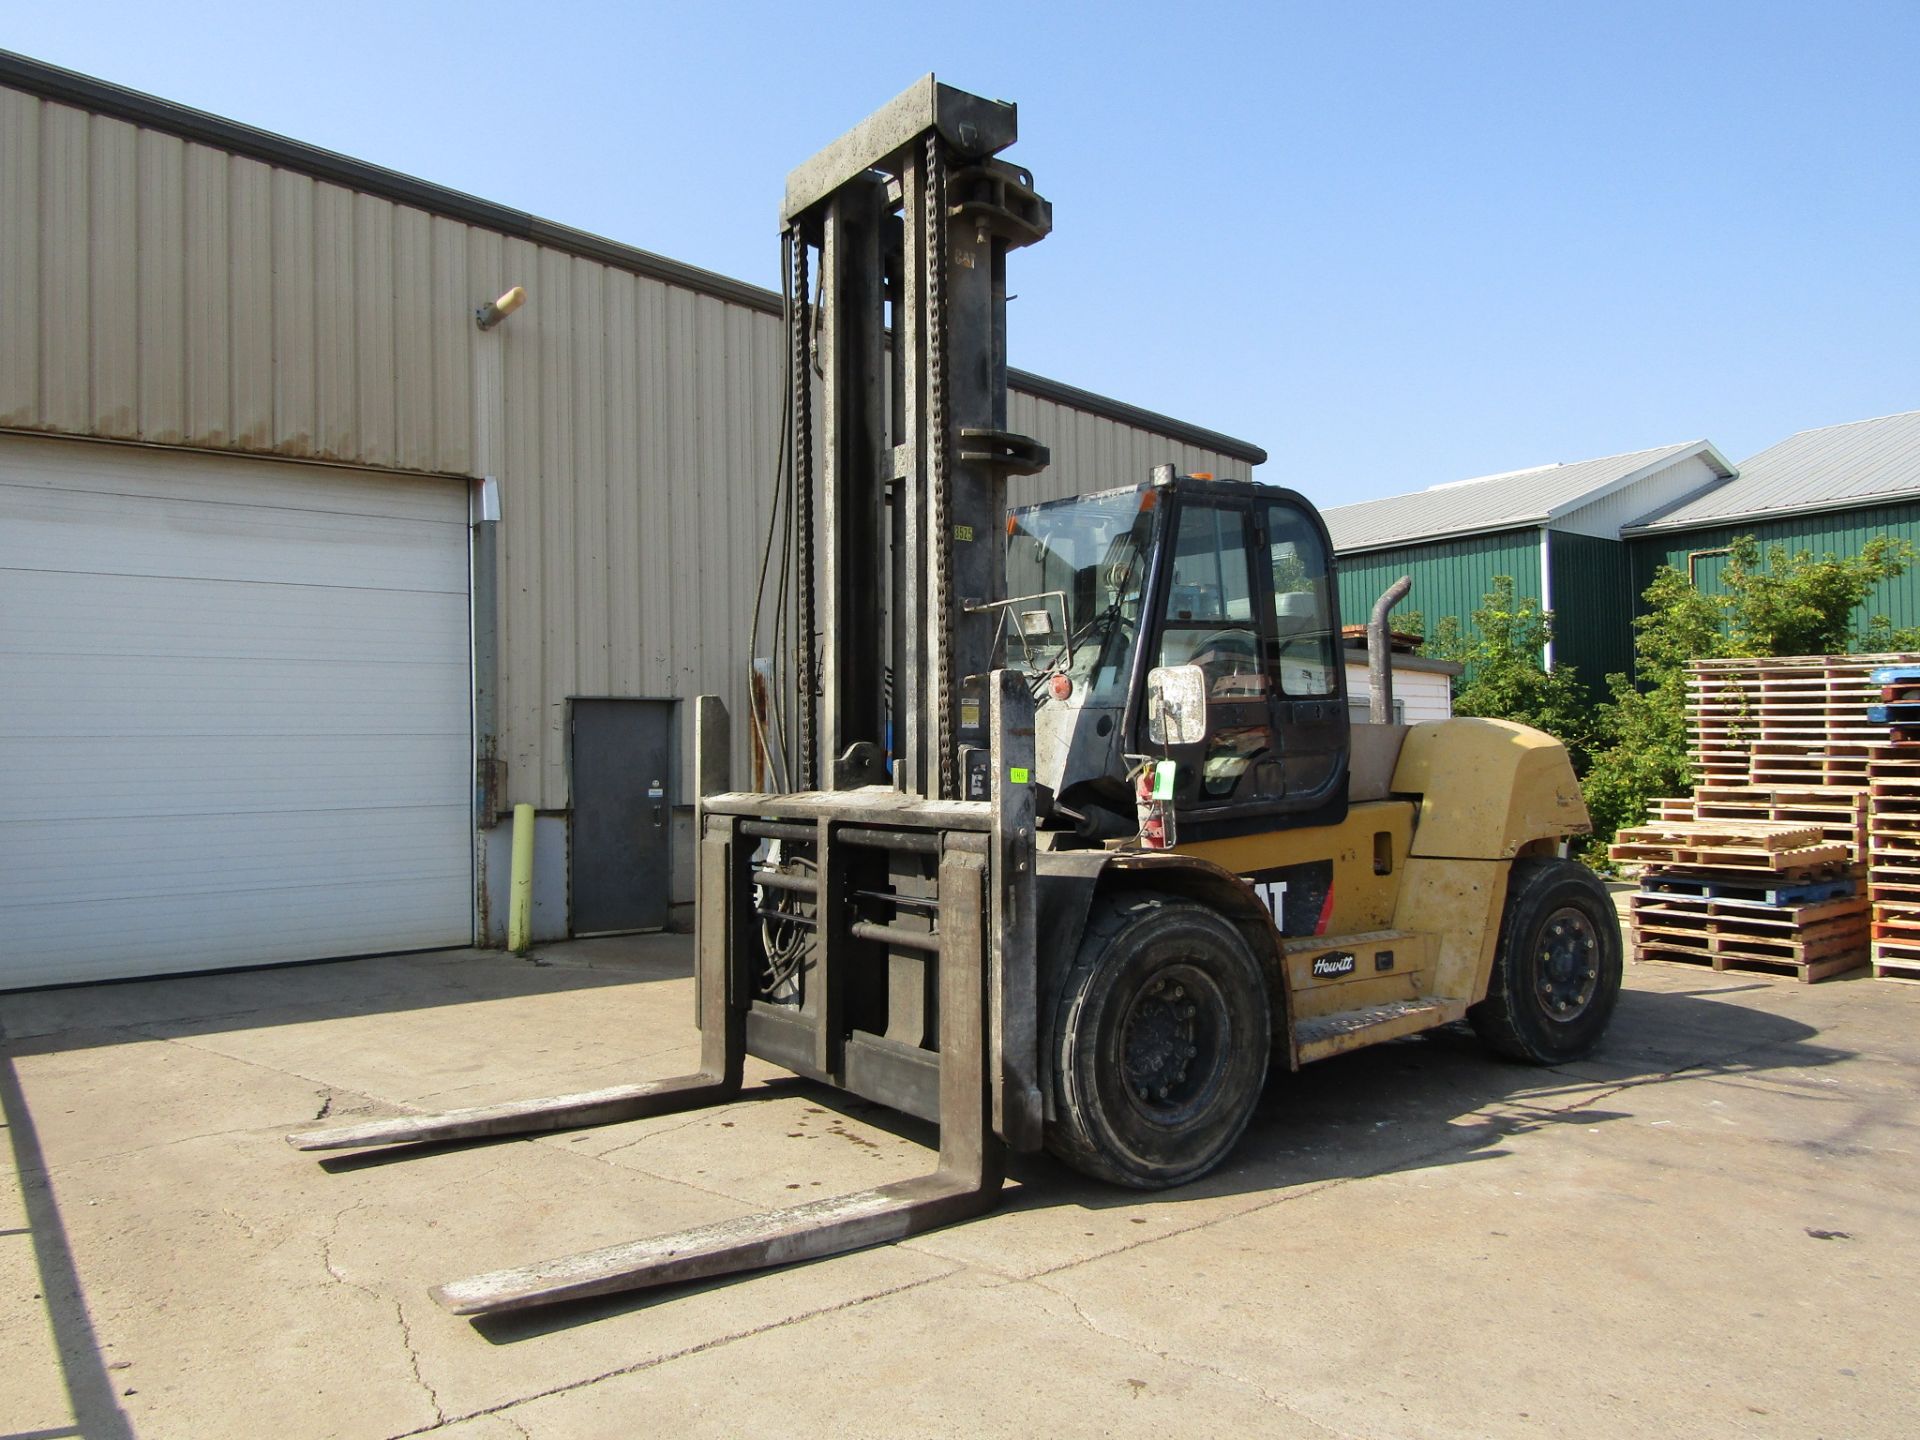 2008 CAT 33000lbs OUTDOOR Forklift with dual front tires & 6' Forks - diesel powered - Image 2 of 2